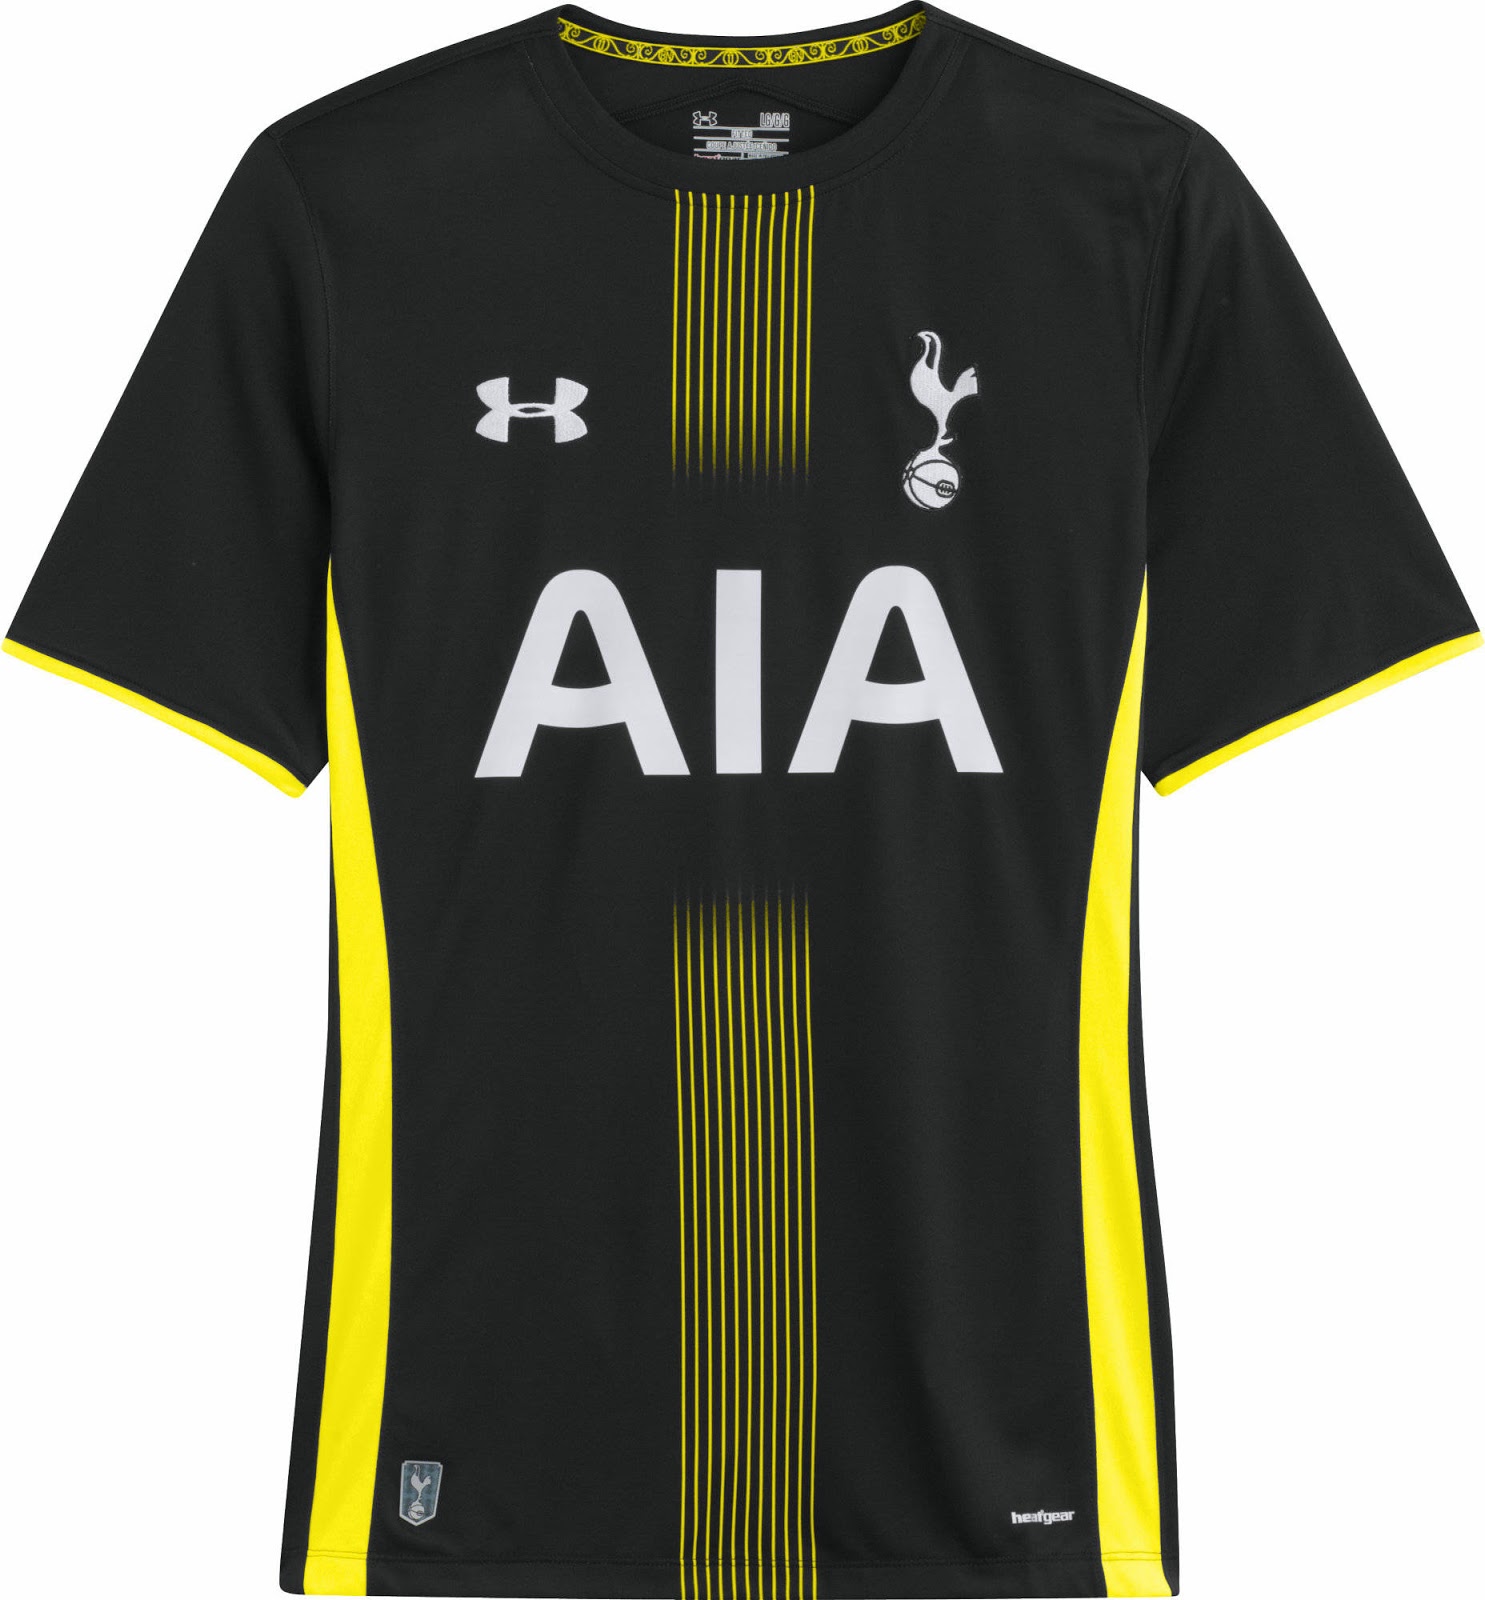 Tottenham Hotspur 2014/15 kits: Club unveil new Bill Nicholson-inspired  home and away shirts, The Independent